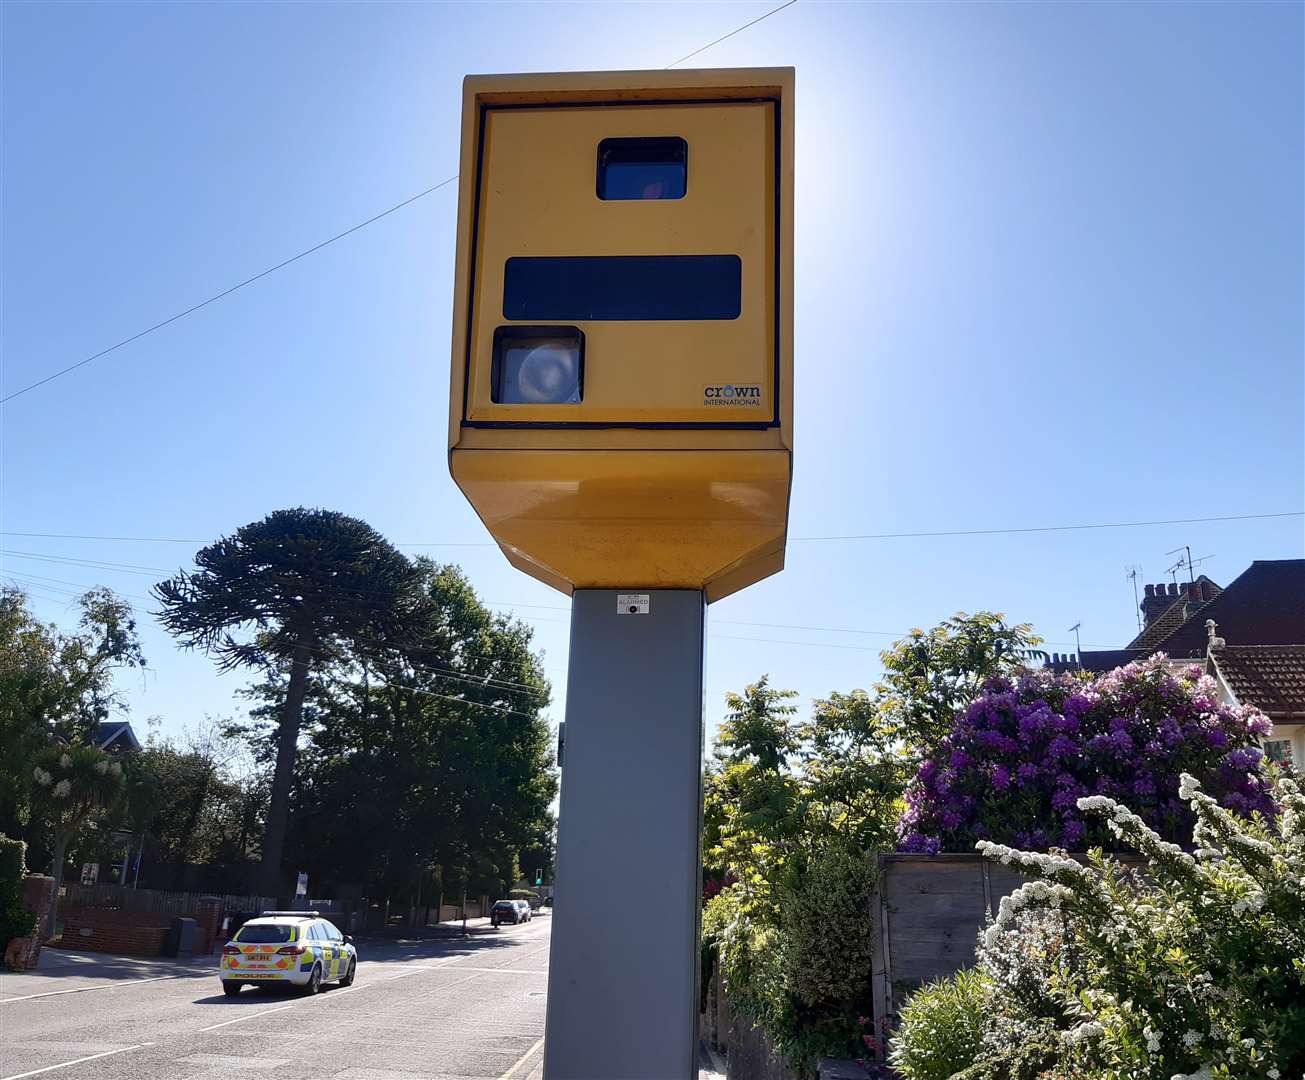 Ashford's only speed camera would monitor the 20mph limit